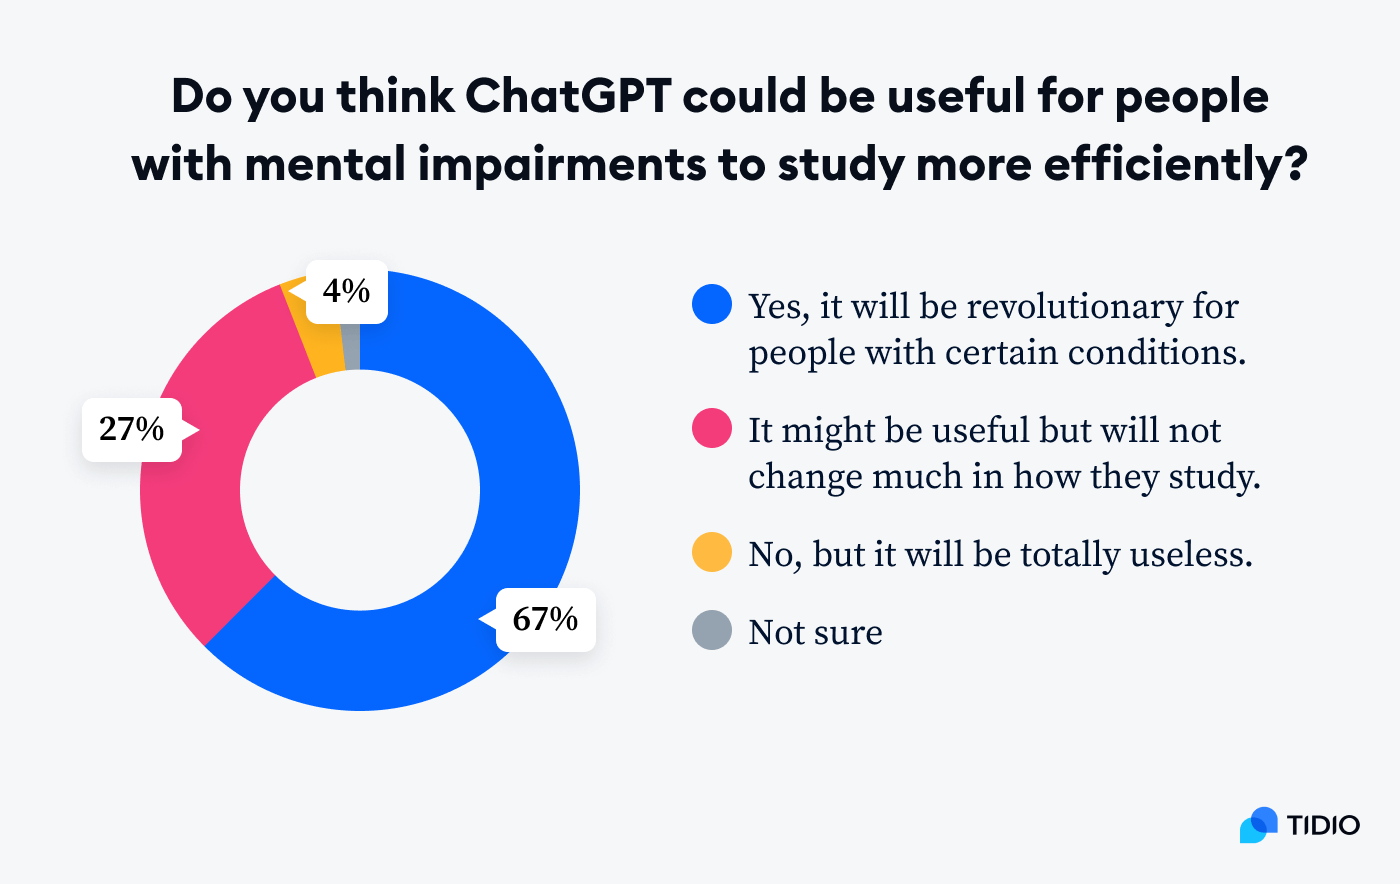 As many as 67% of respondents believe ChatGPT could help people with certain mental impairments study more efficiently image